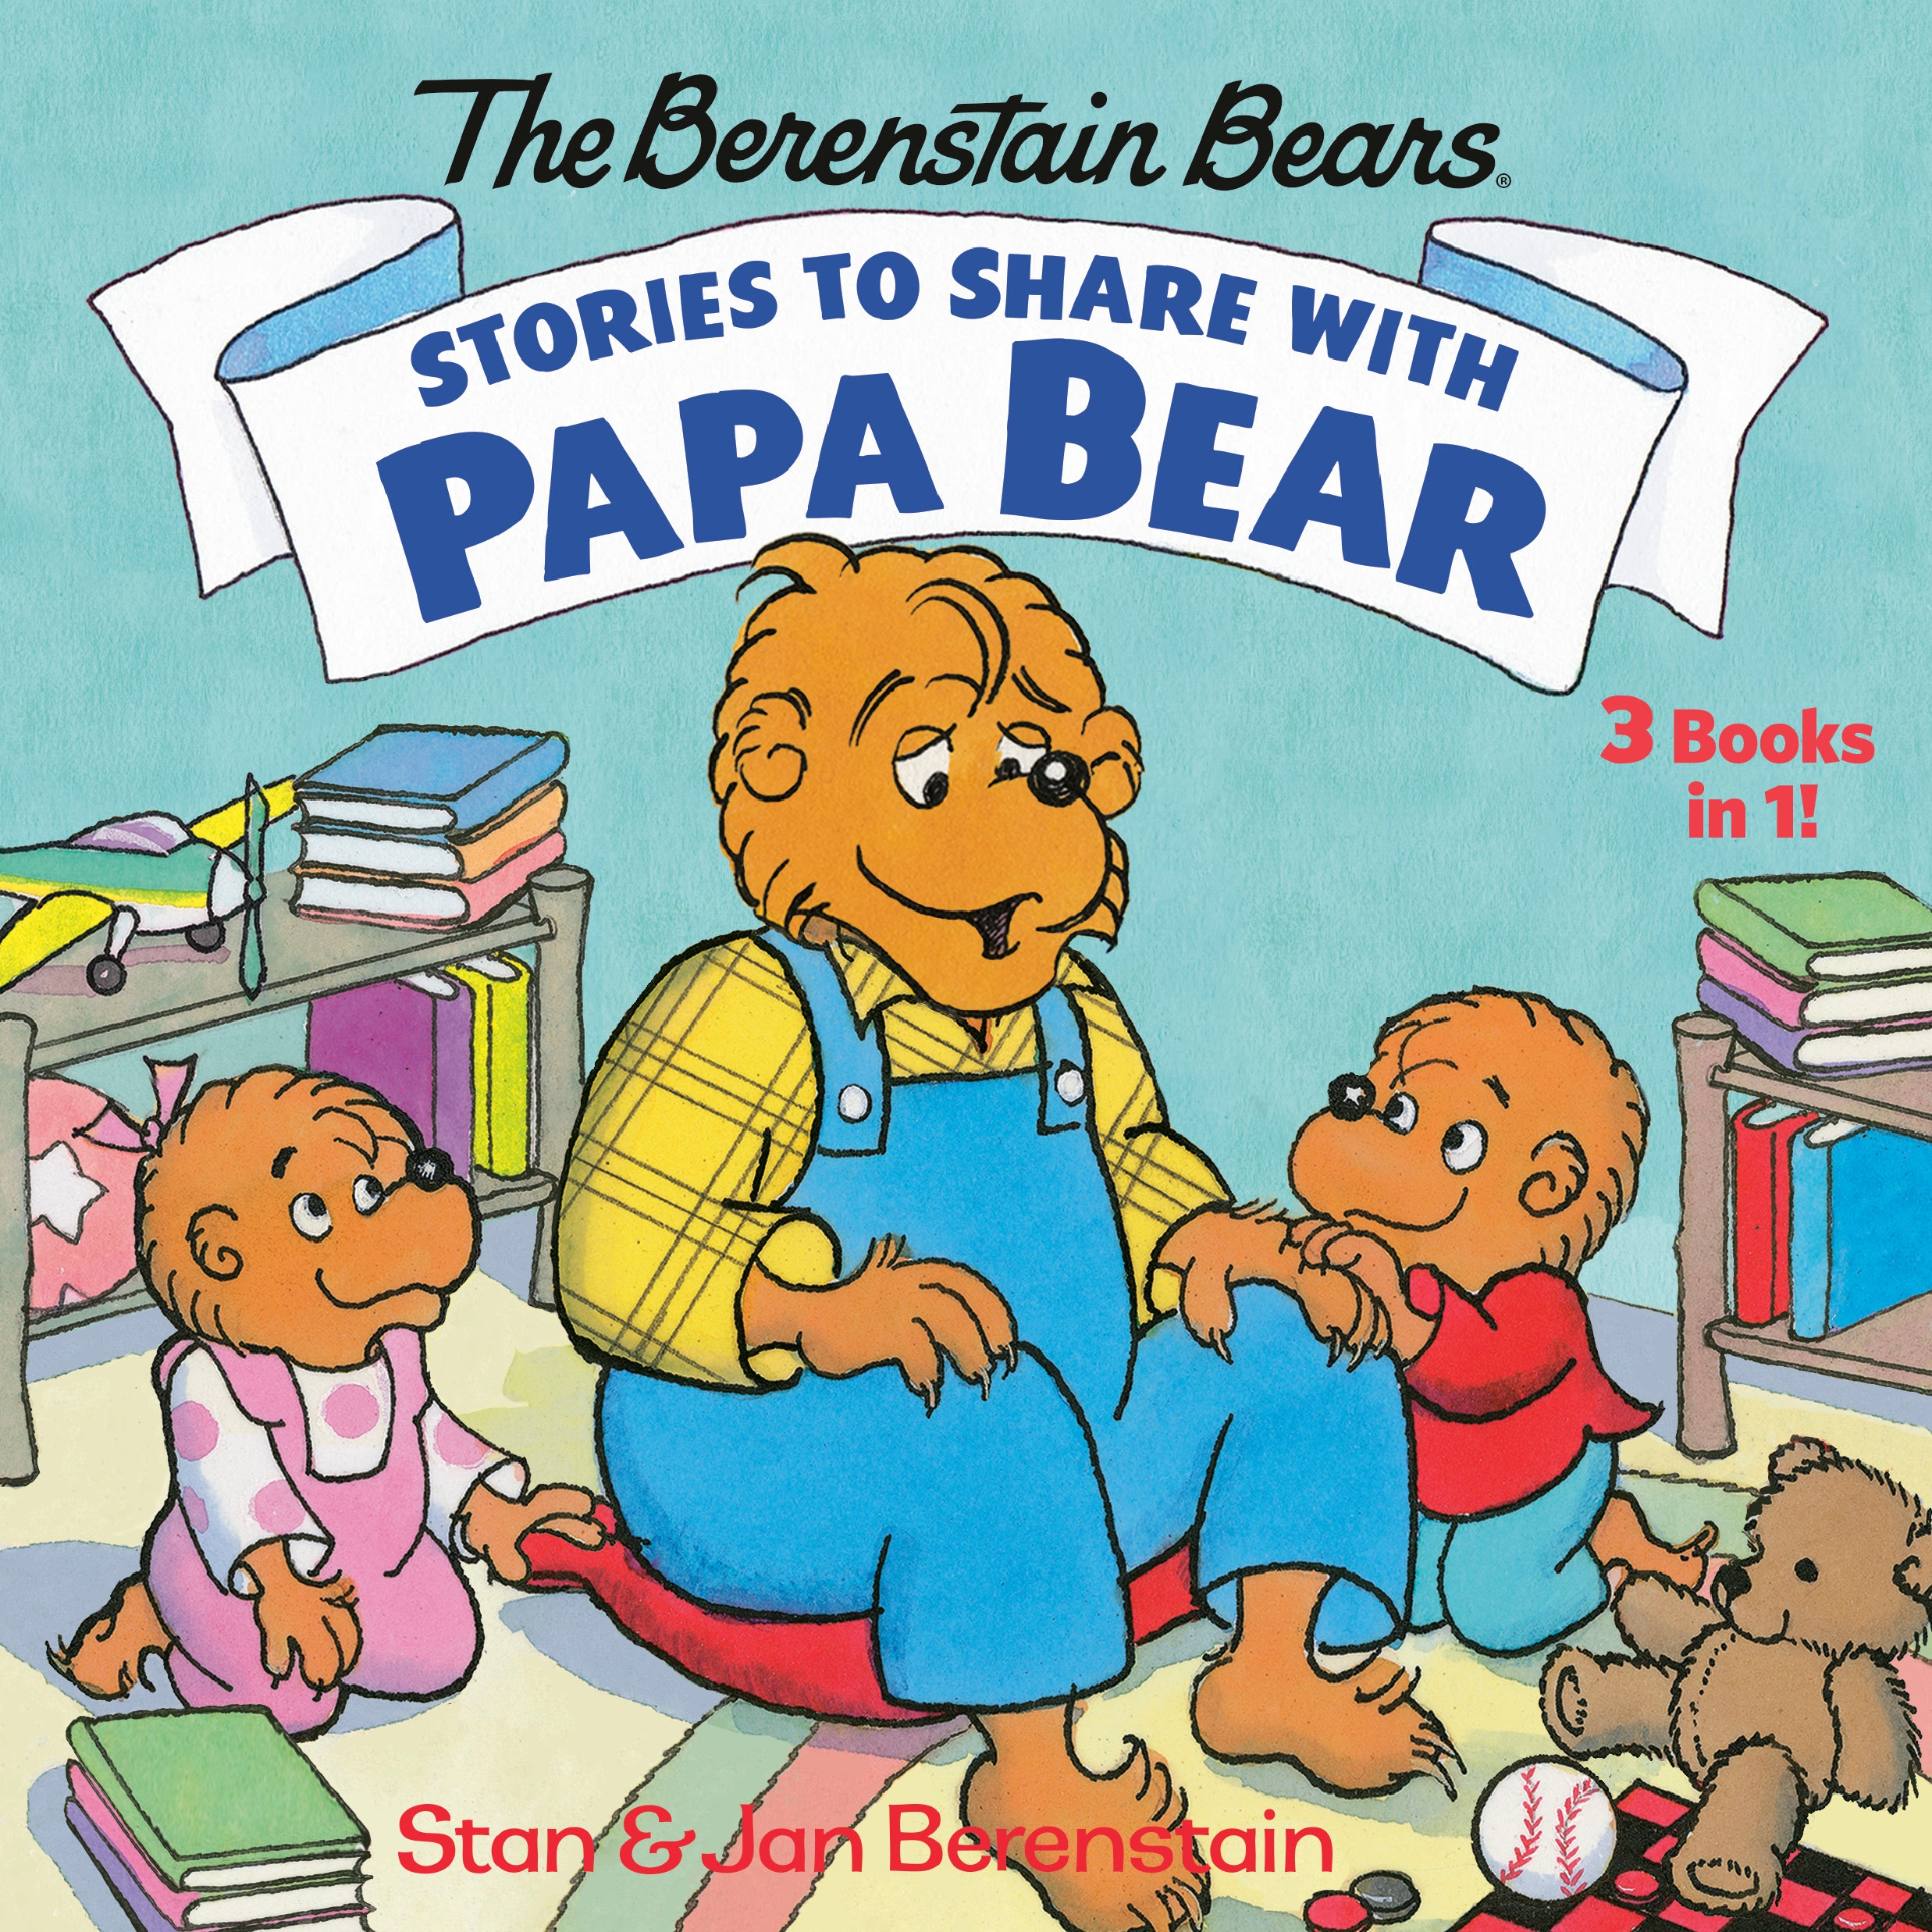 Stories to Share with Papa Bear (The Berenstain Bears) by Stan